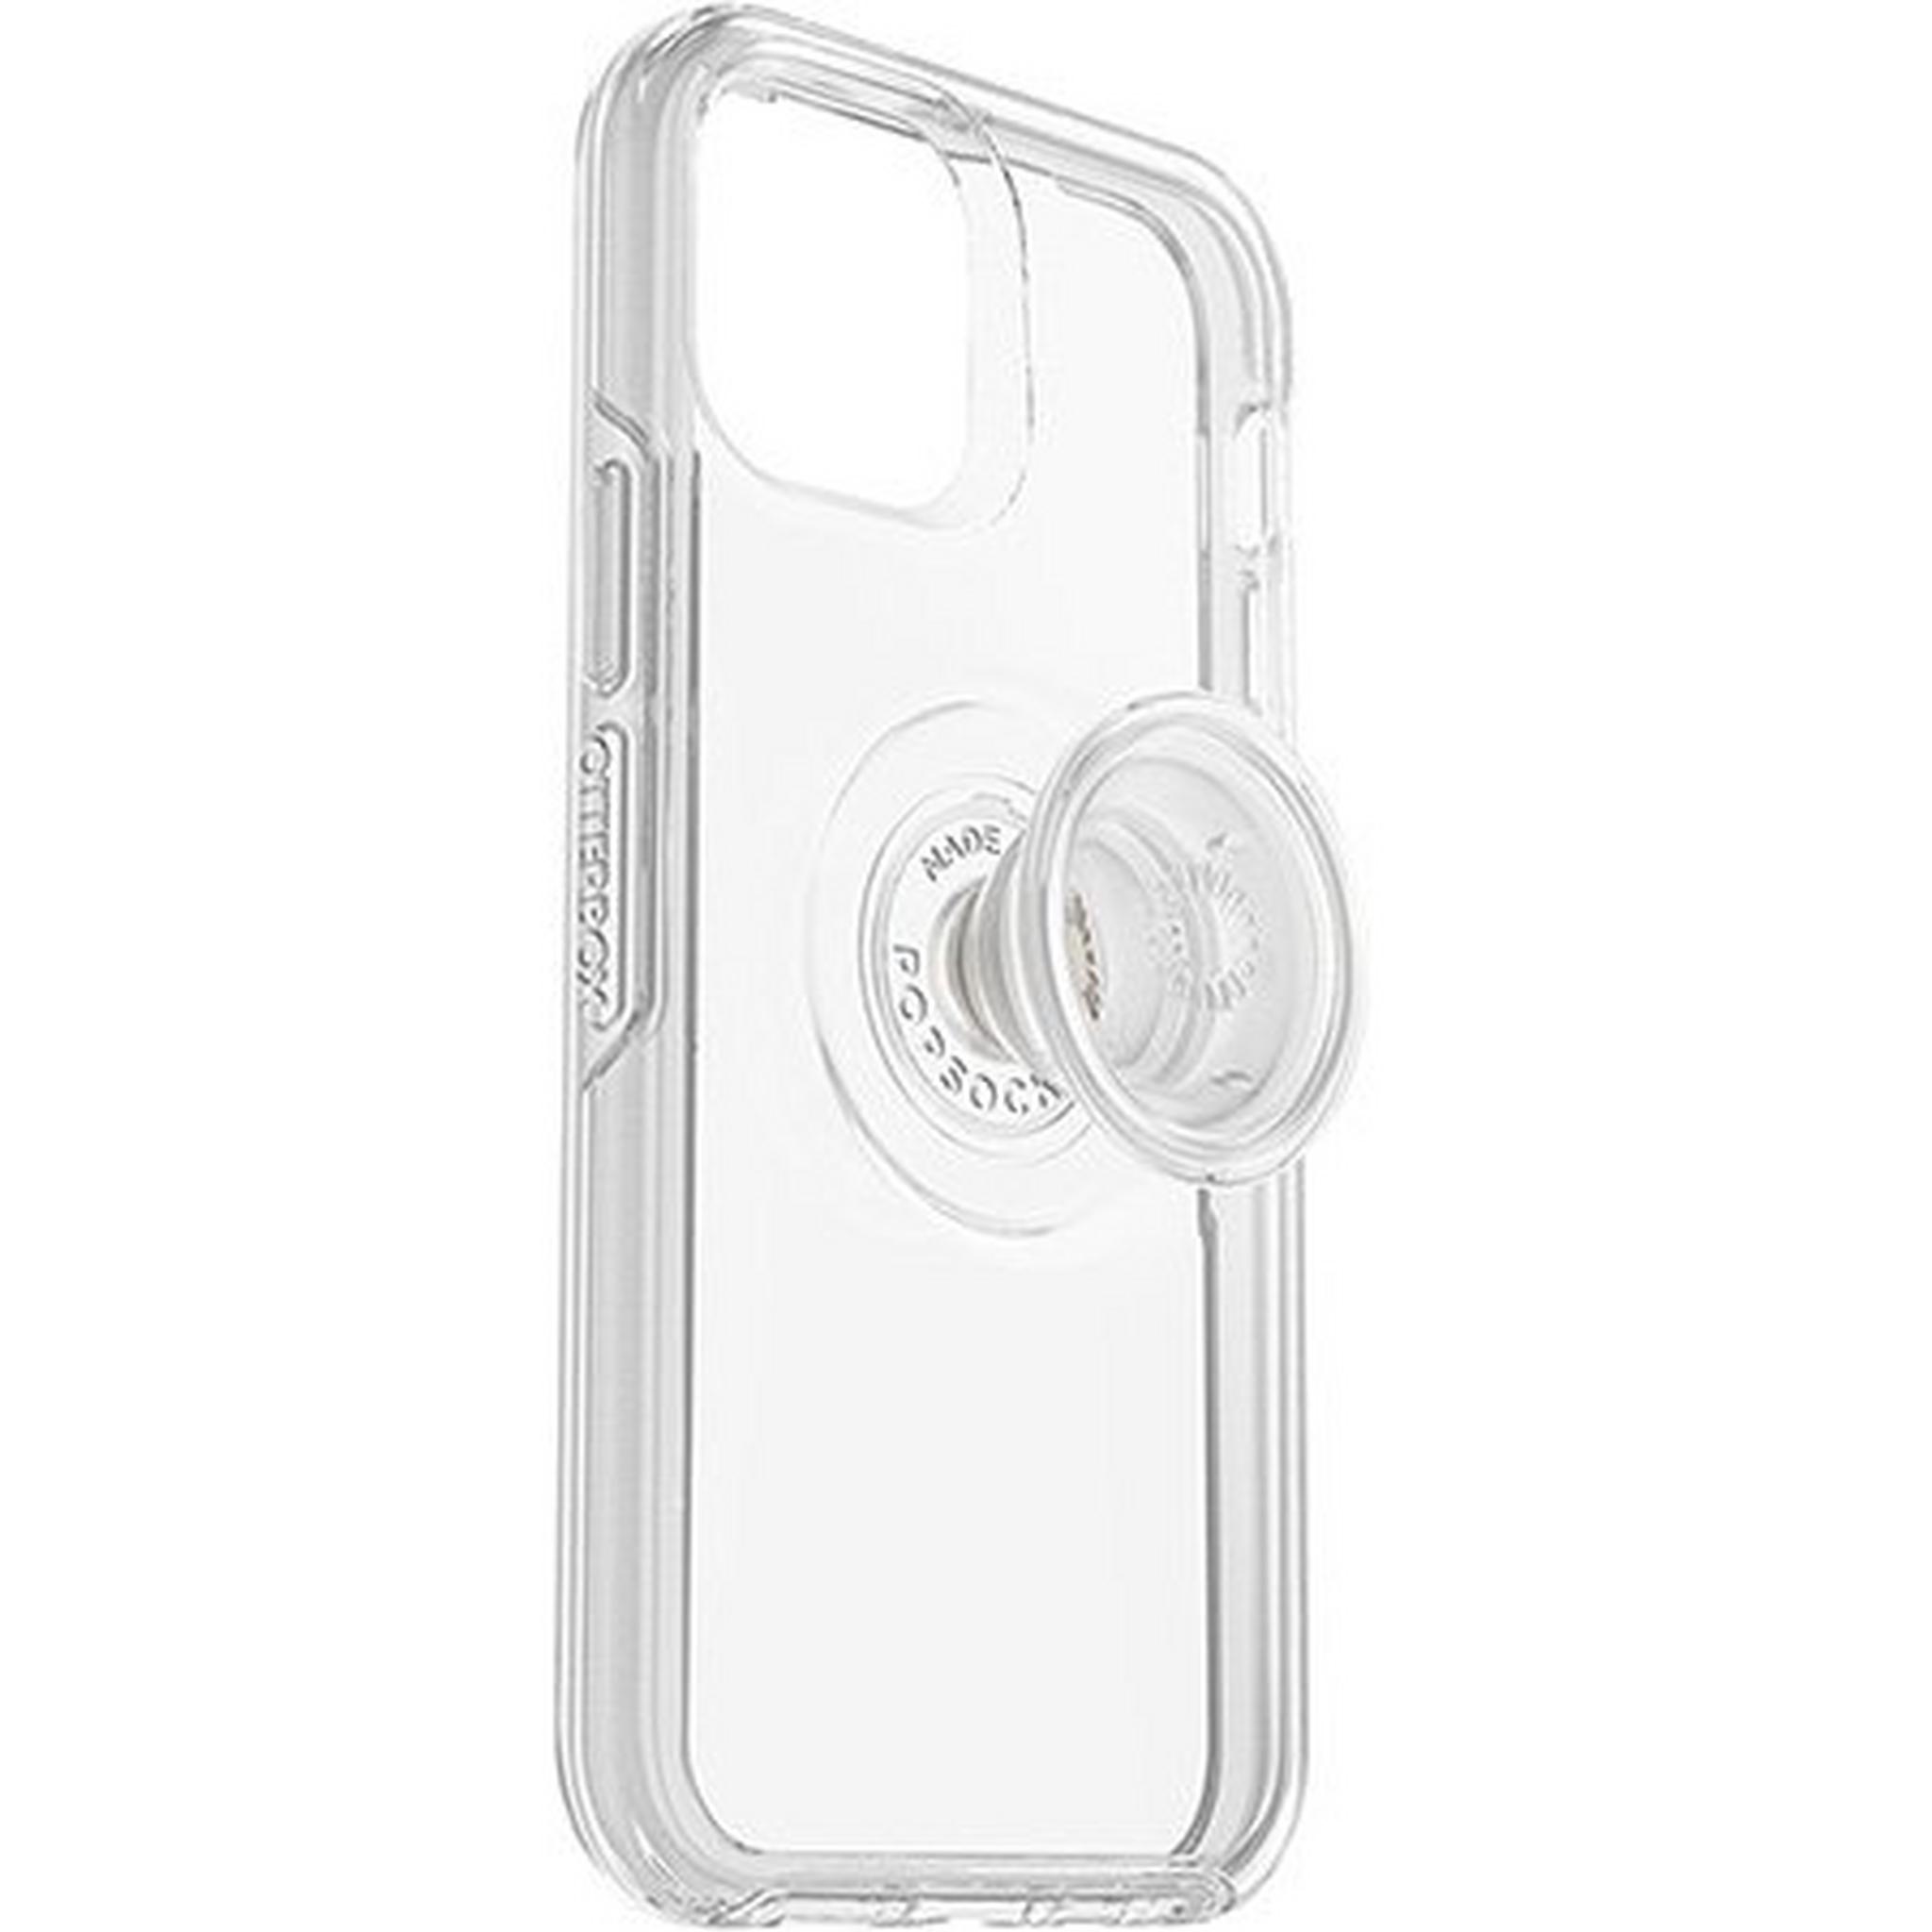 Otterbox iPhone 12 Pro Case with Pop Symmetry Grip - Clear